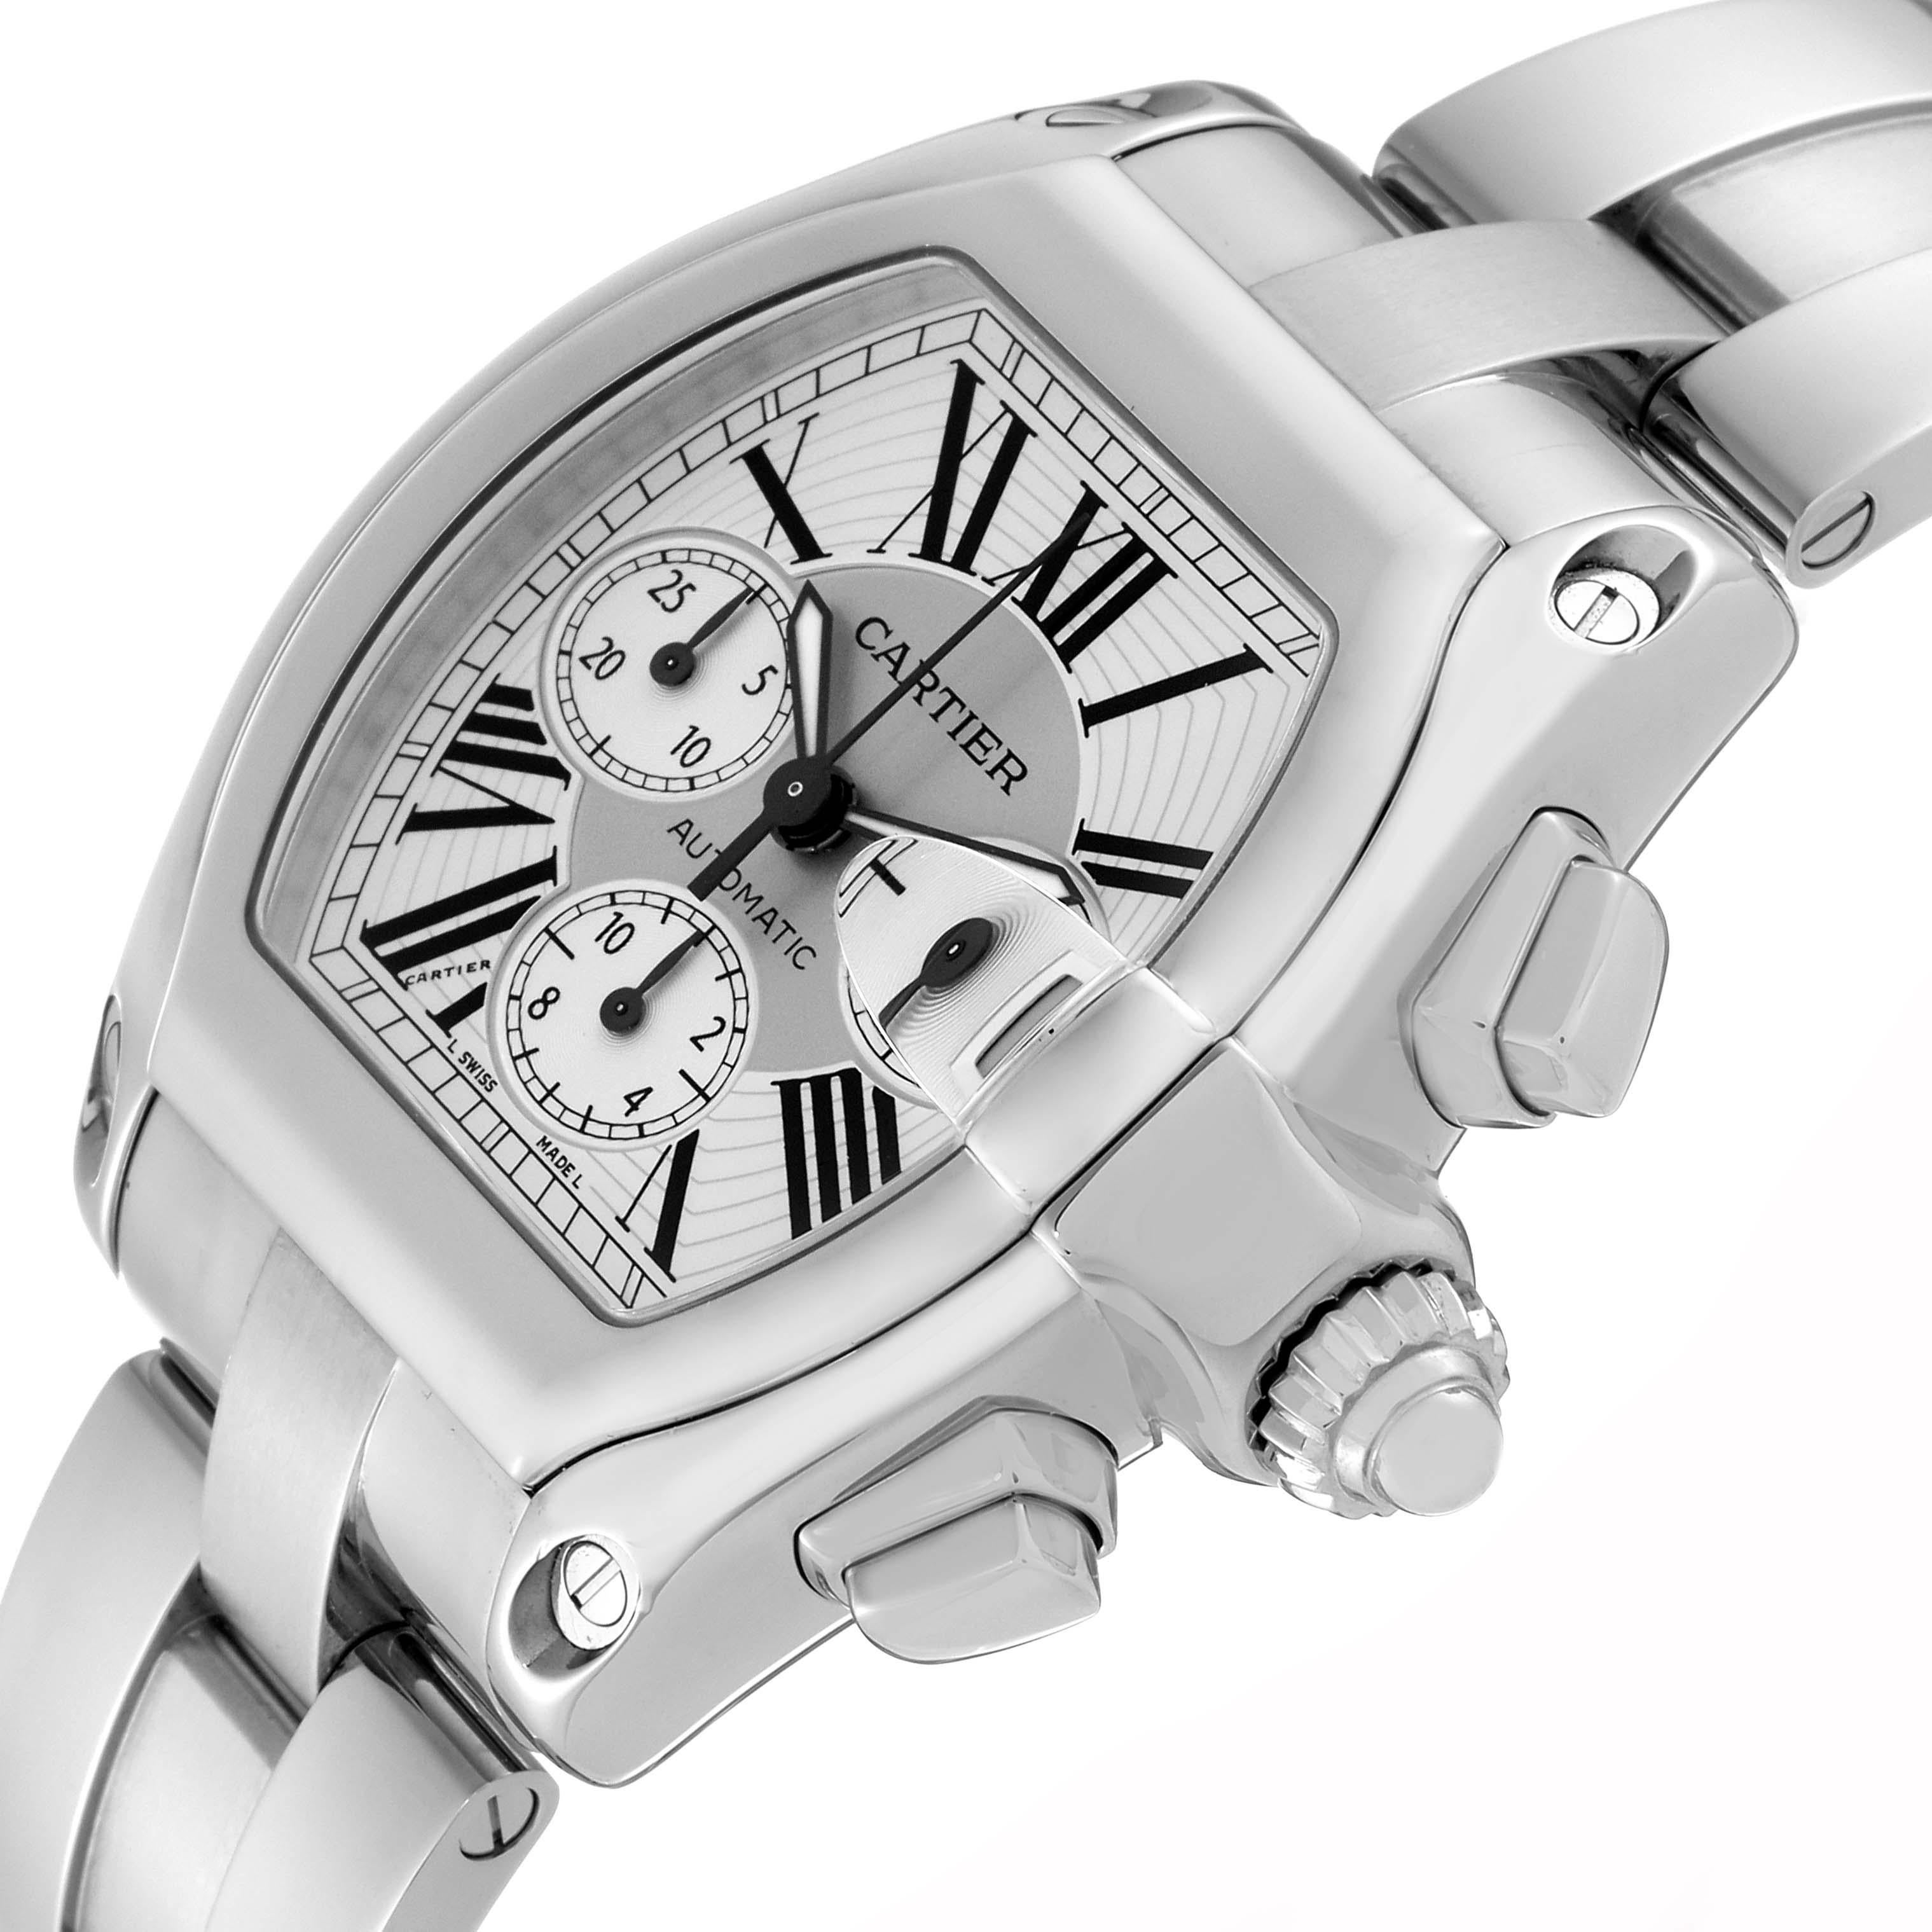 Cartier Roadster XL Chronograph Steel Mens Watch W62019X6 Box Papers 1